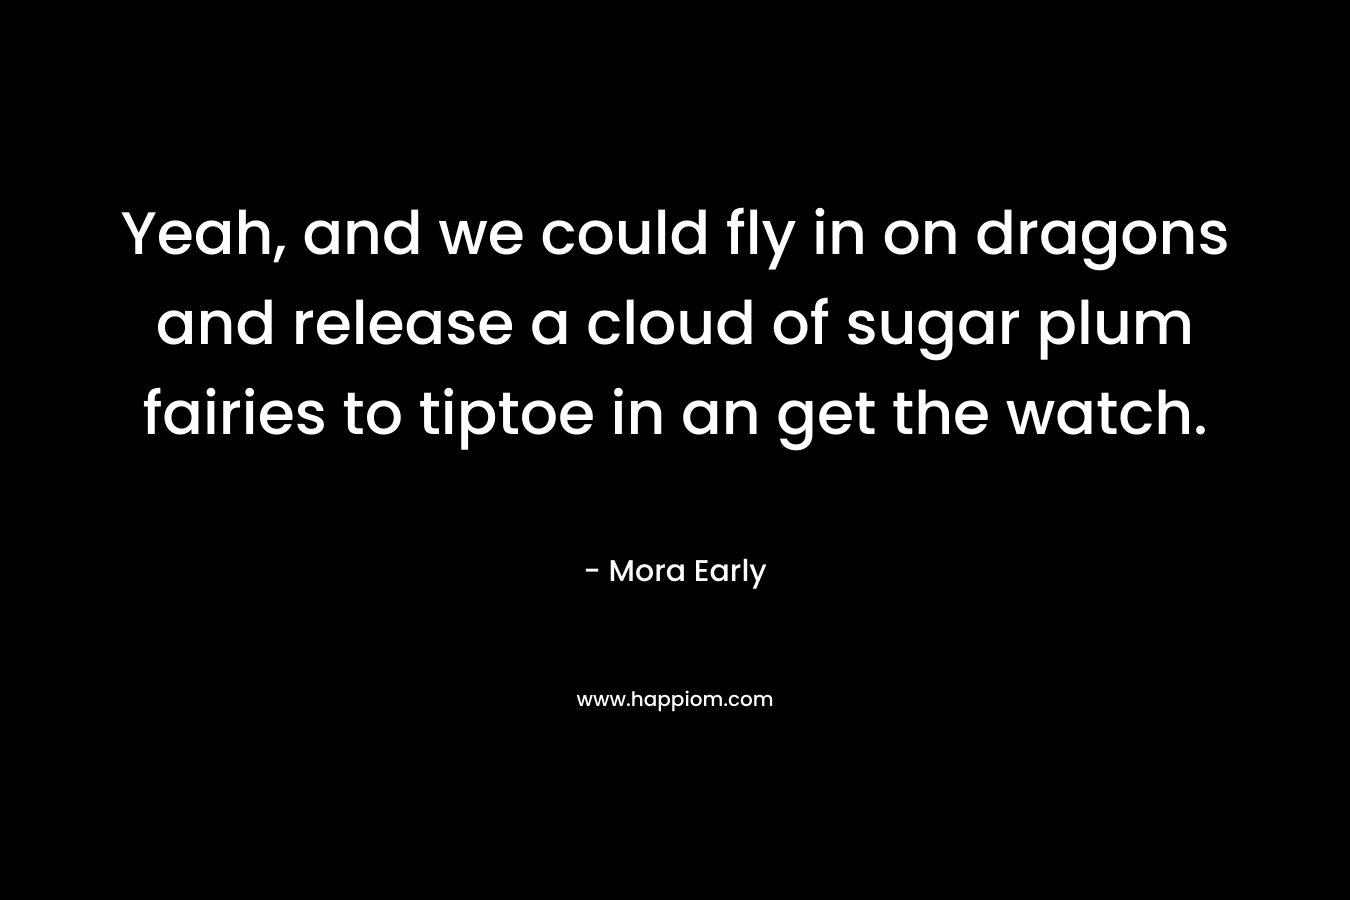 Yeah, and we could fly in on dragons and release a cloud of sugar plum fairies to tiptoe in an get the watch. – Mora Early